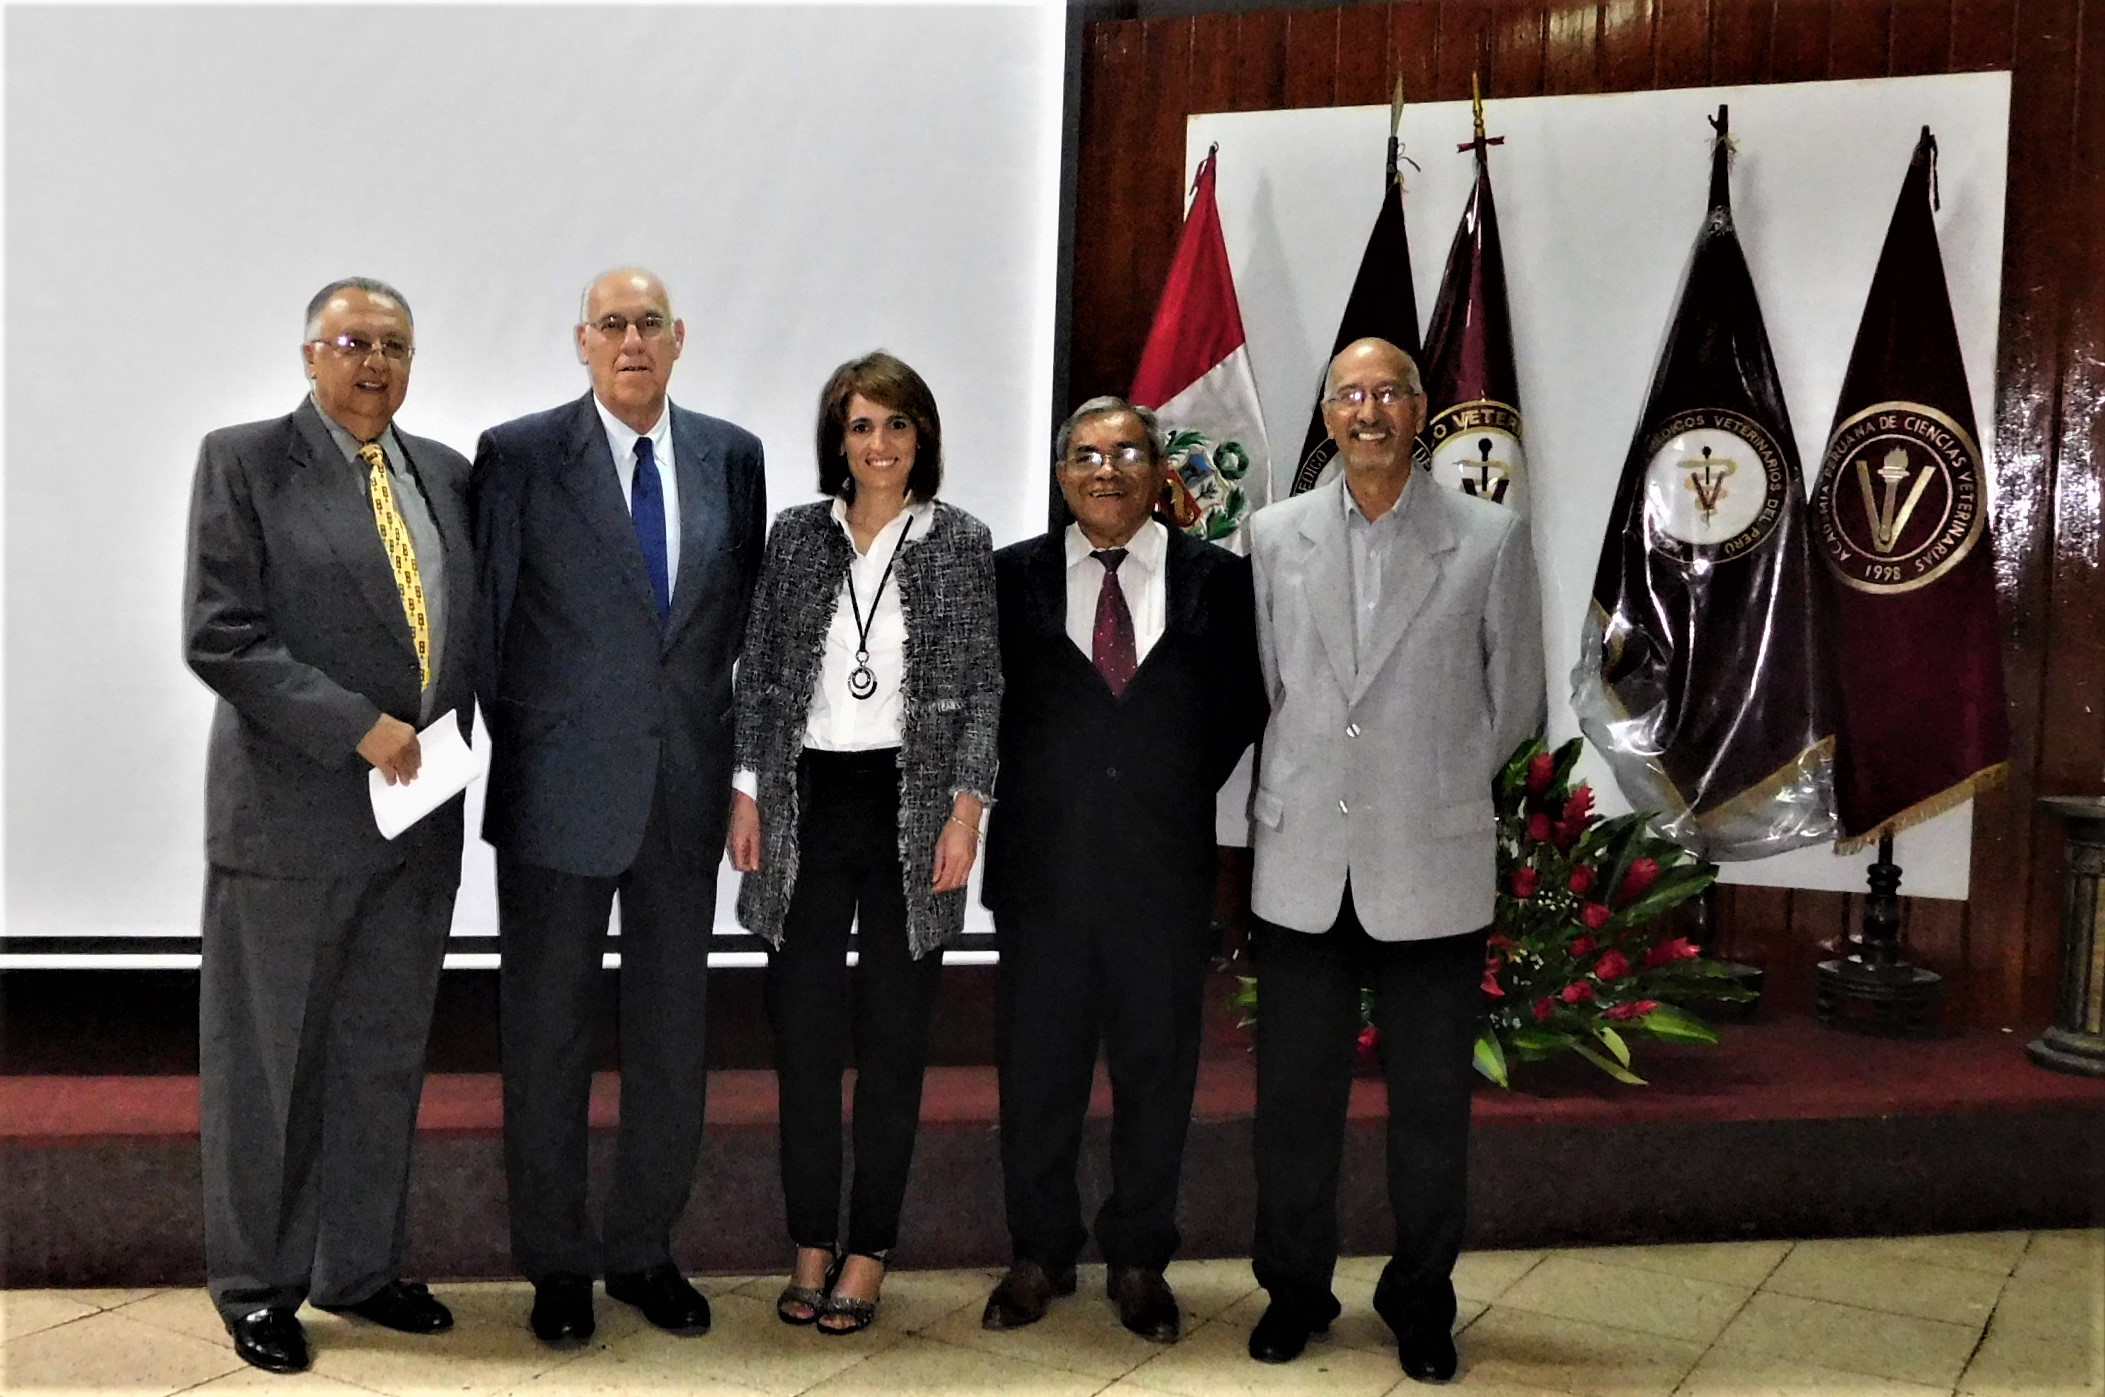 The lecture “From proplasts to pronutrients and the metagenetic generation”  in Lima